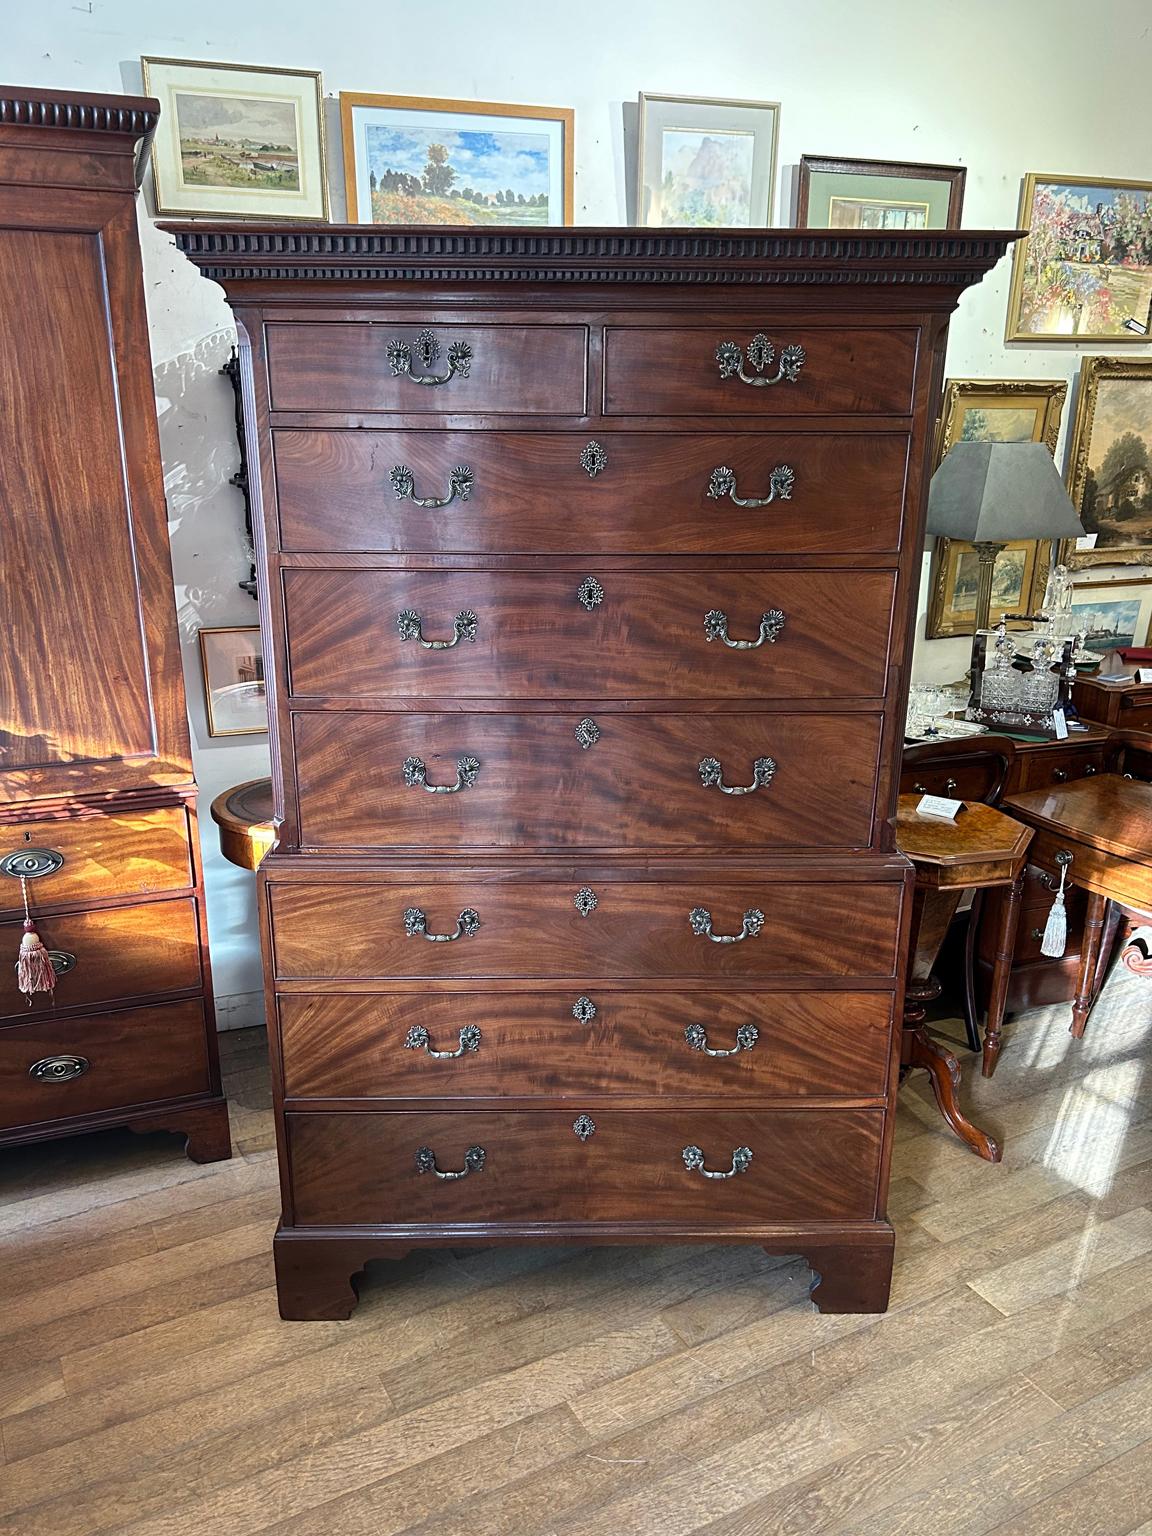 A very high quality 18th Century (George III) Mahogany Chest On Chest (Tallboy) with a Secretaire drawer, which includes: 6 small strung drawers, 4 pigeon and a middle lockable cupboard. Two short drawers at the top and five long drawers with